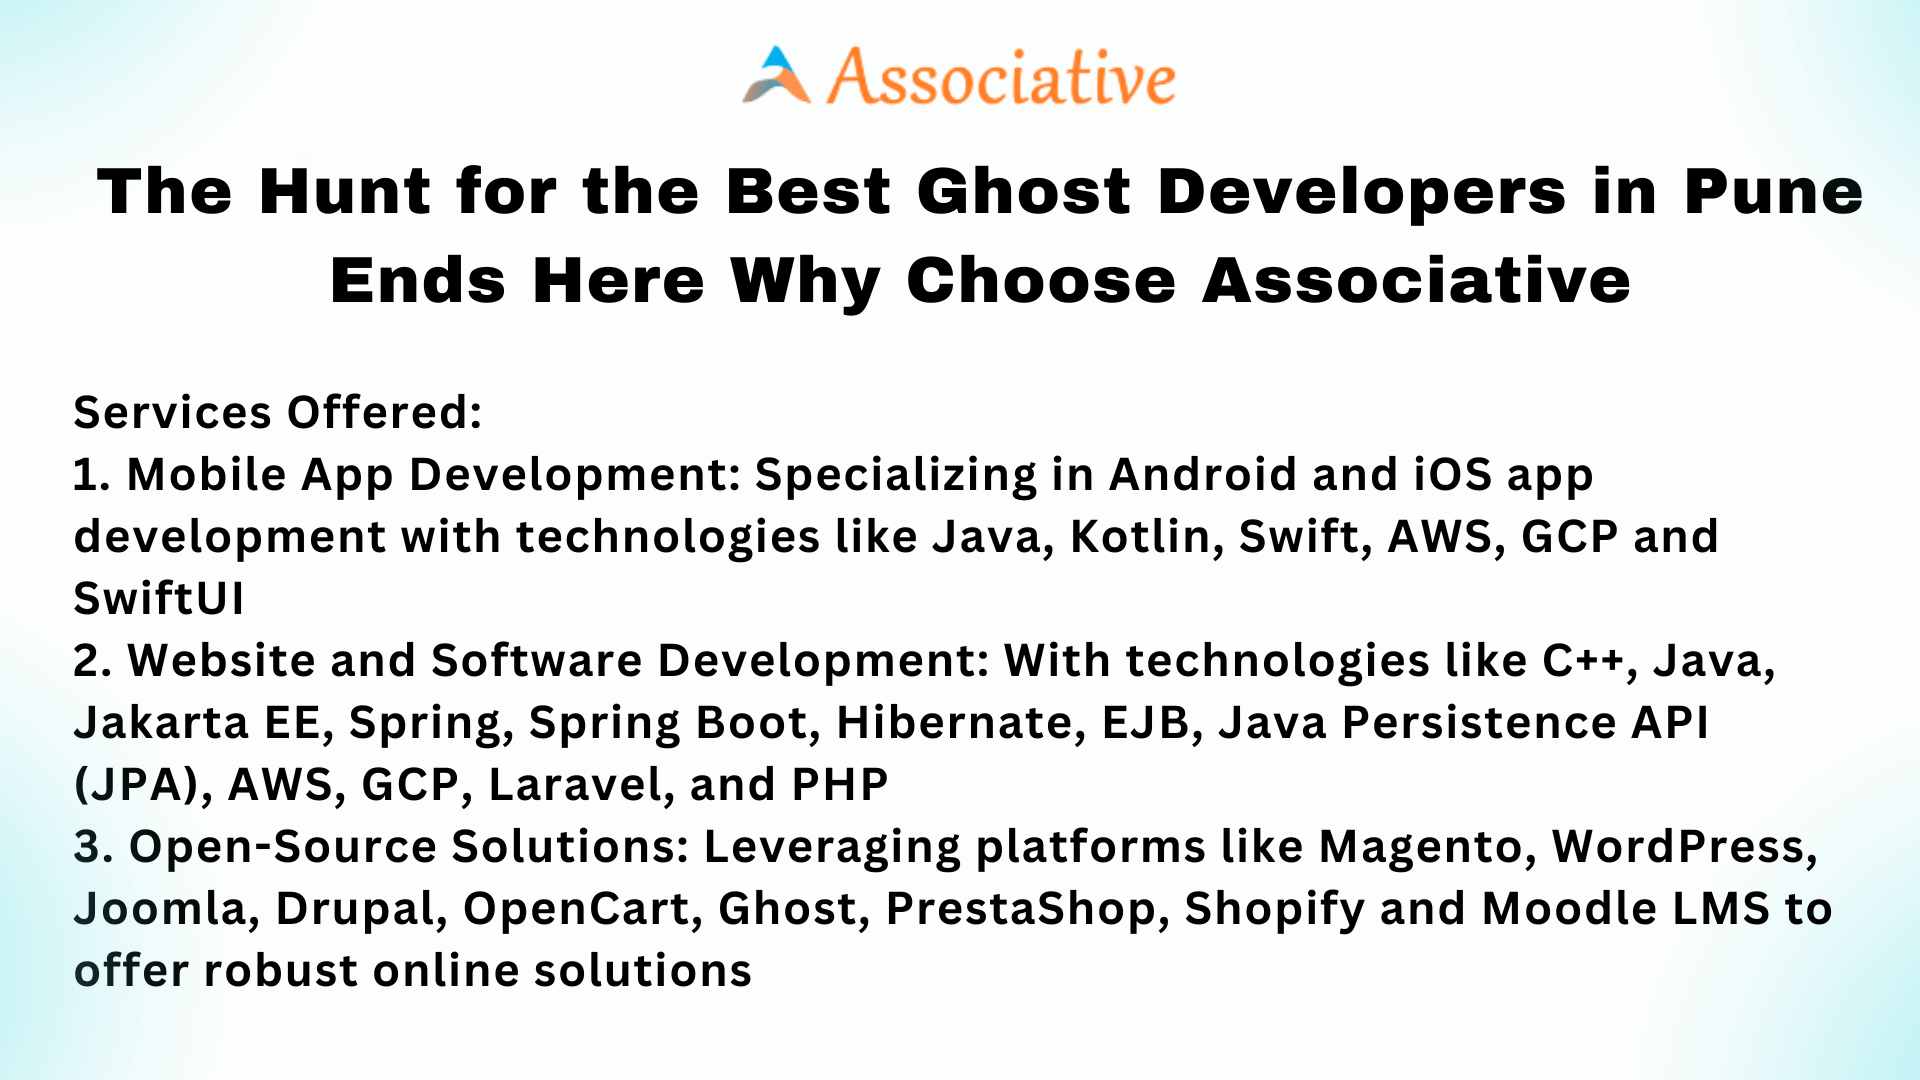 The Hunt for the Best Ghost Developers in Pune Ends Here Why Choose Associative